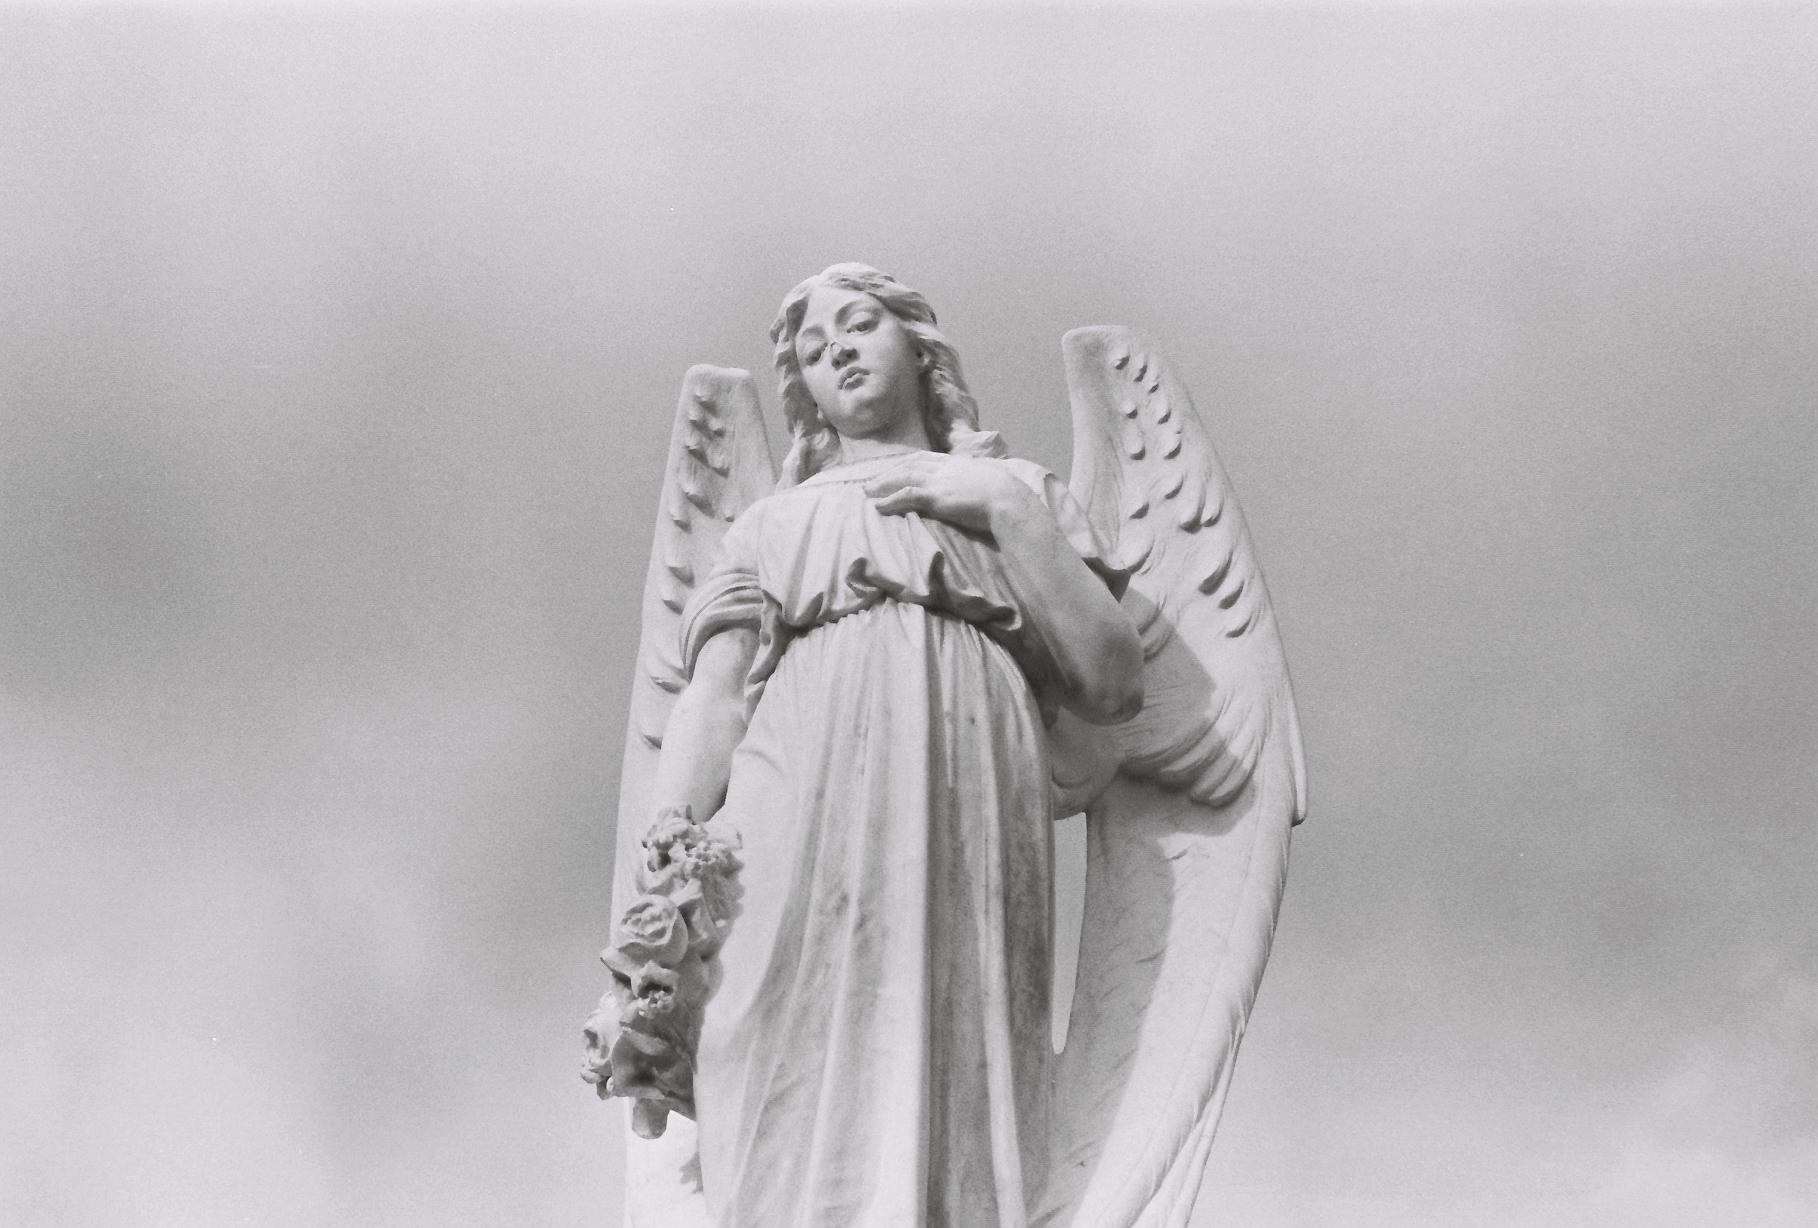 Angel statue on a cloudy day